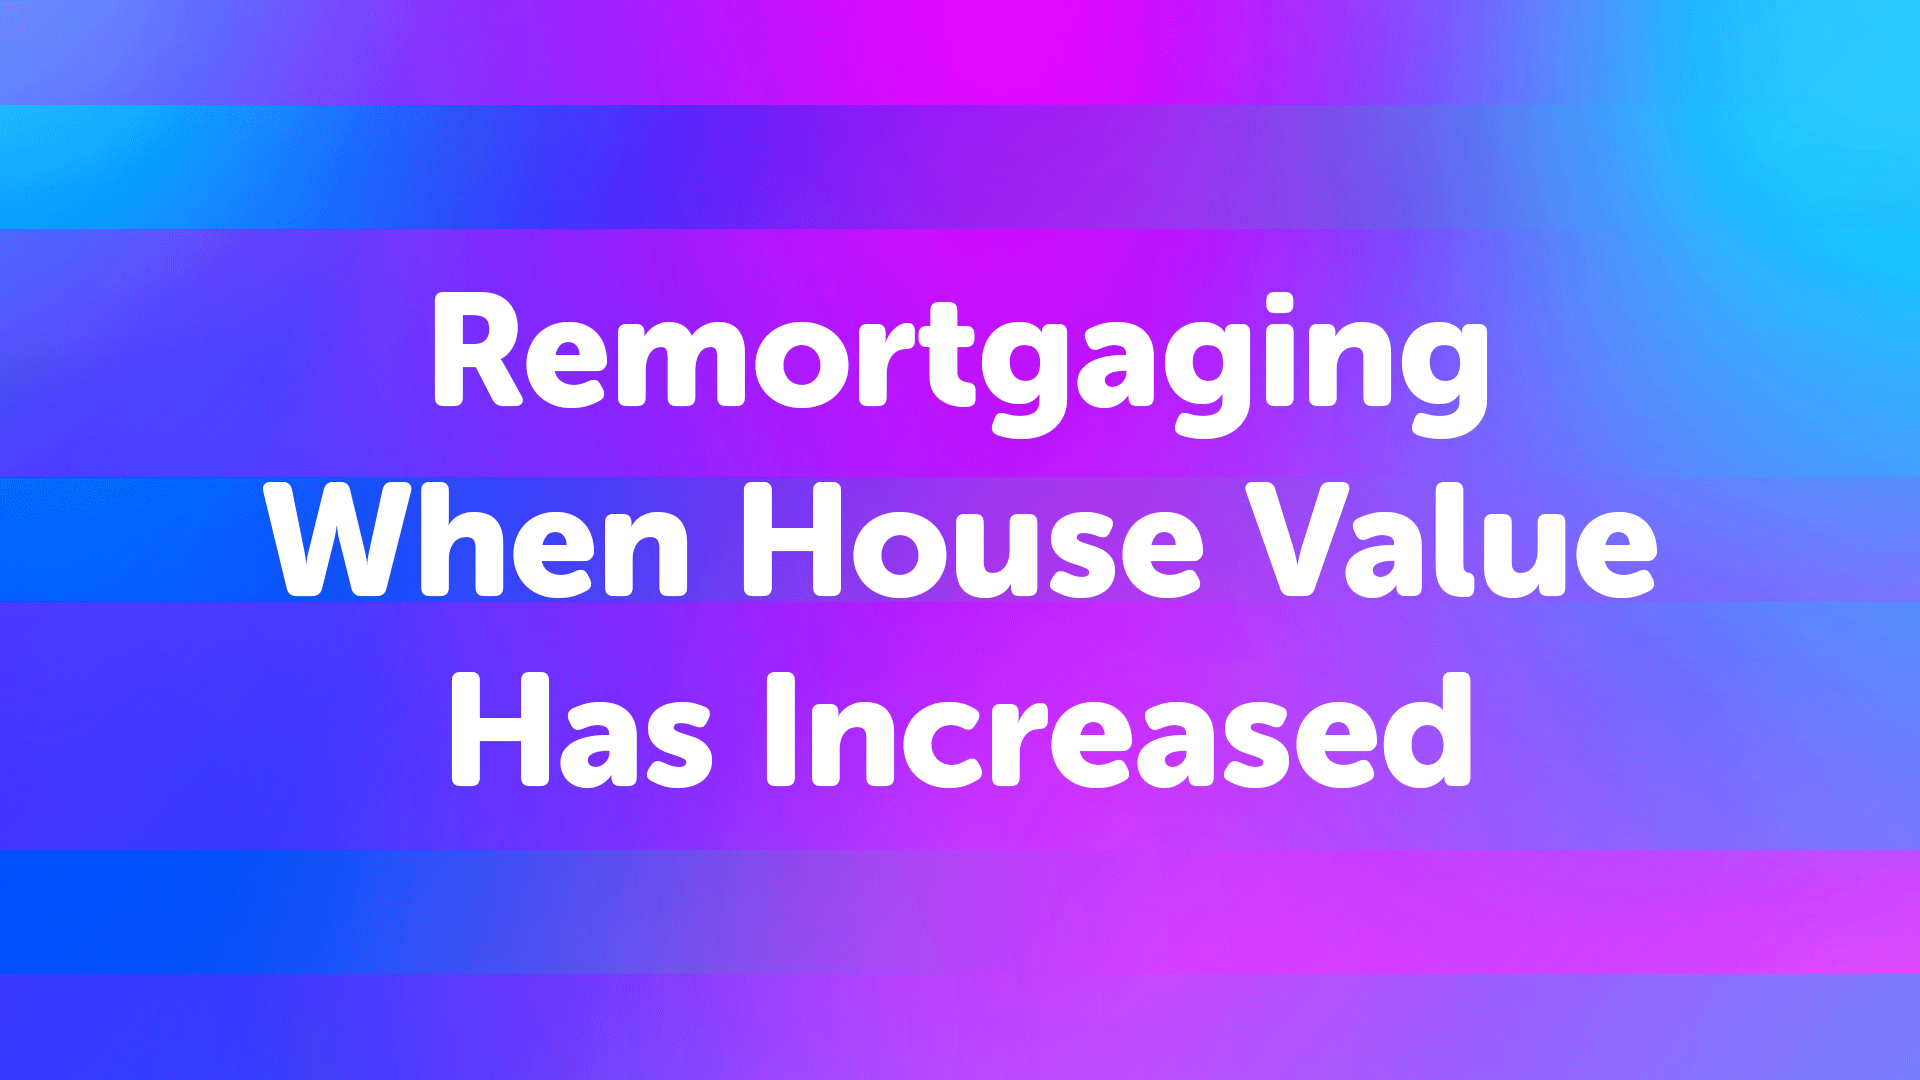 Remortgaging when your house value has increased | Mortgage broker in London | Mortgage Advisor in London | Mortgage advice in London | Londonmoneyman